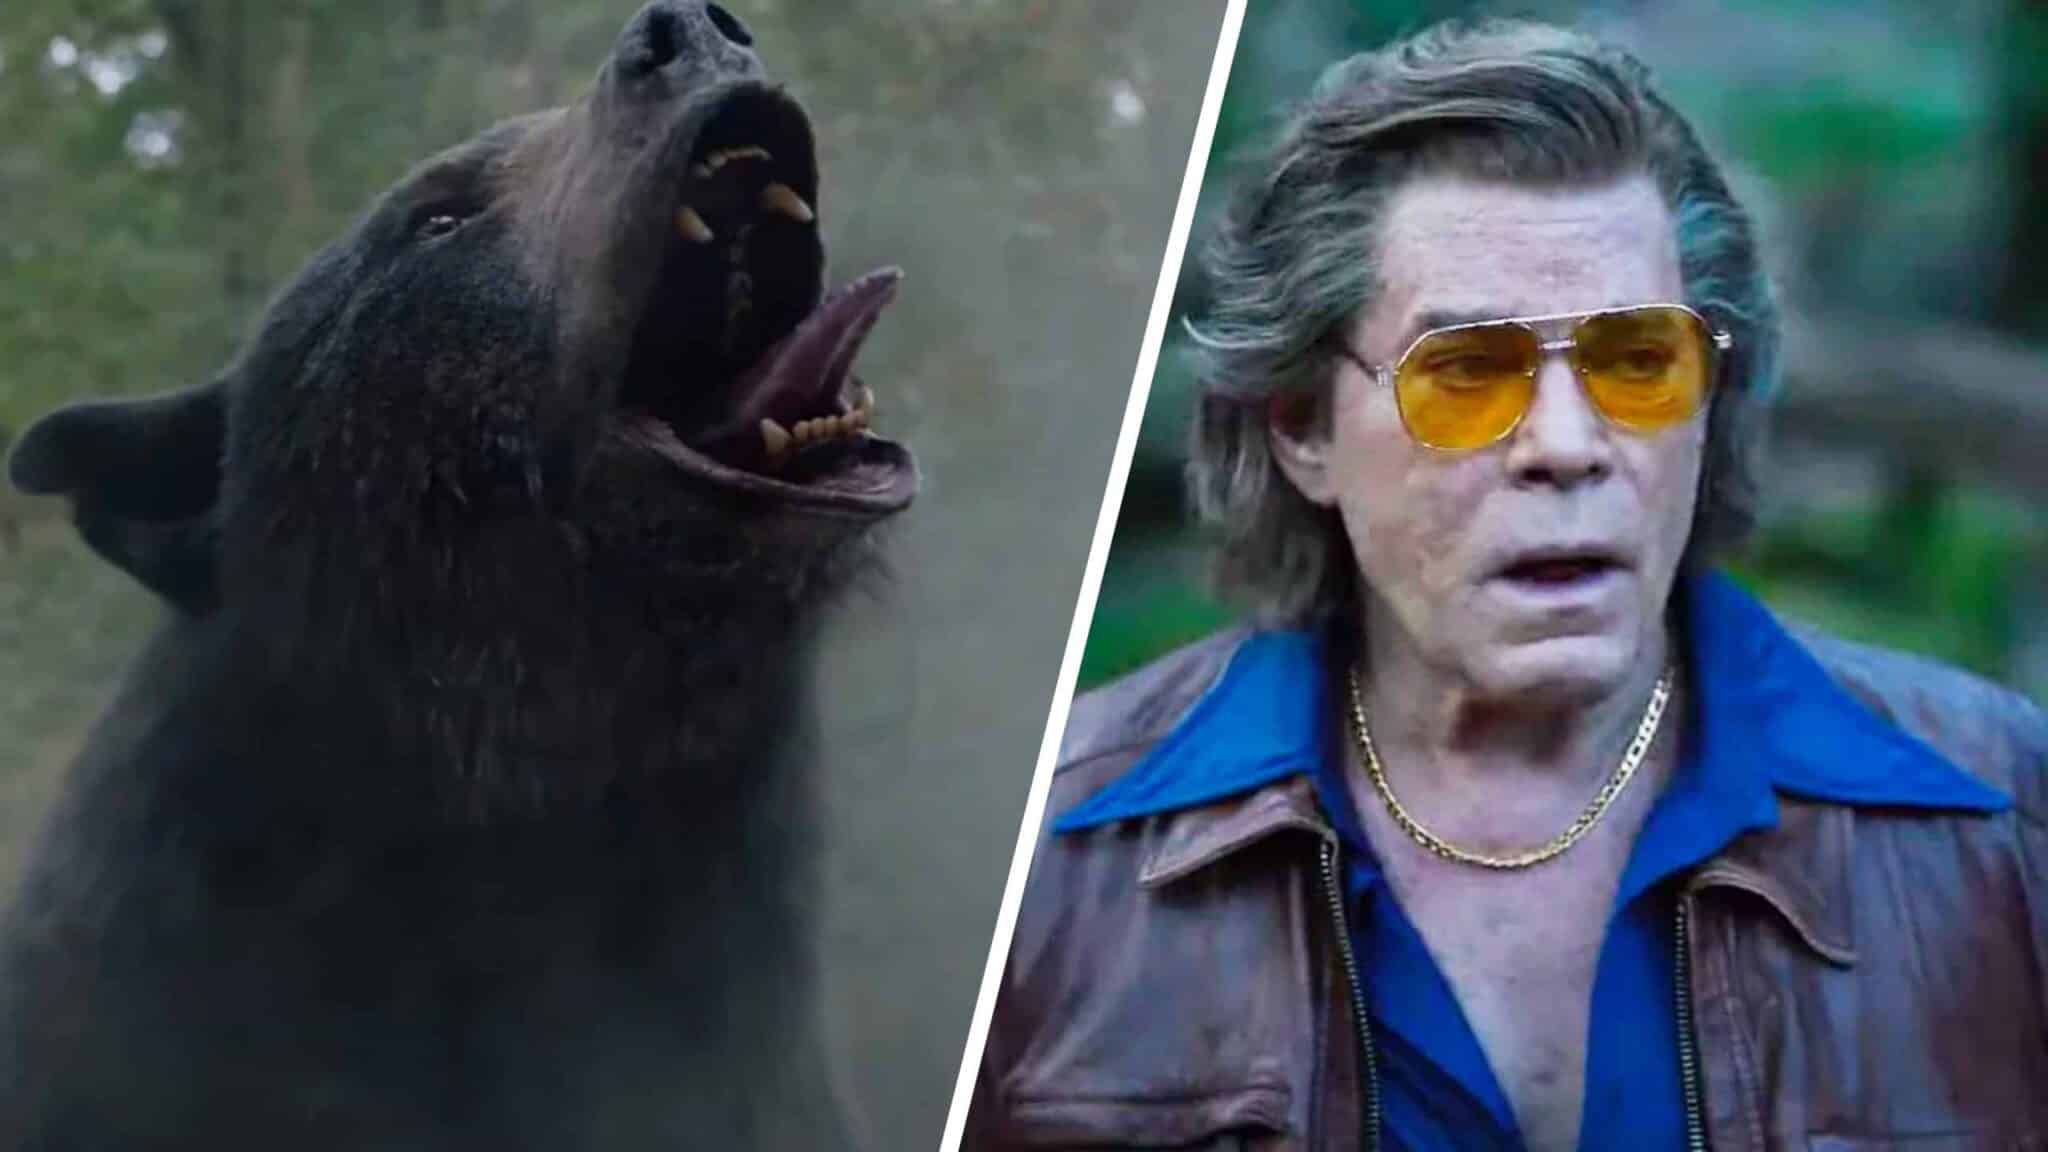 Somebody Made A Movie About a Bear on Cocaine, & It’s A True Story